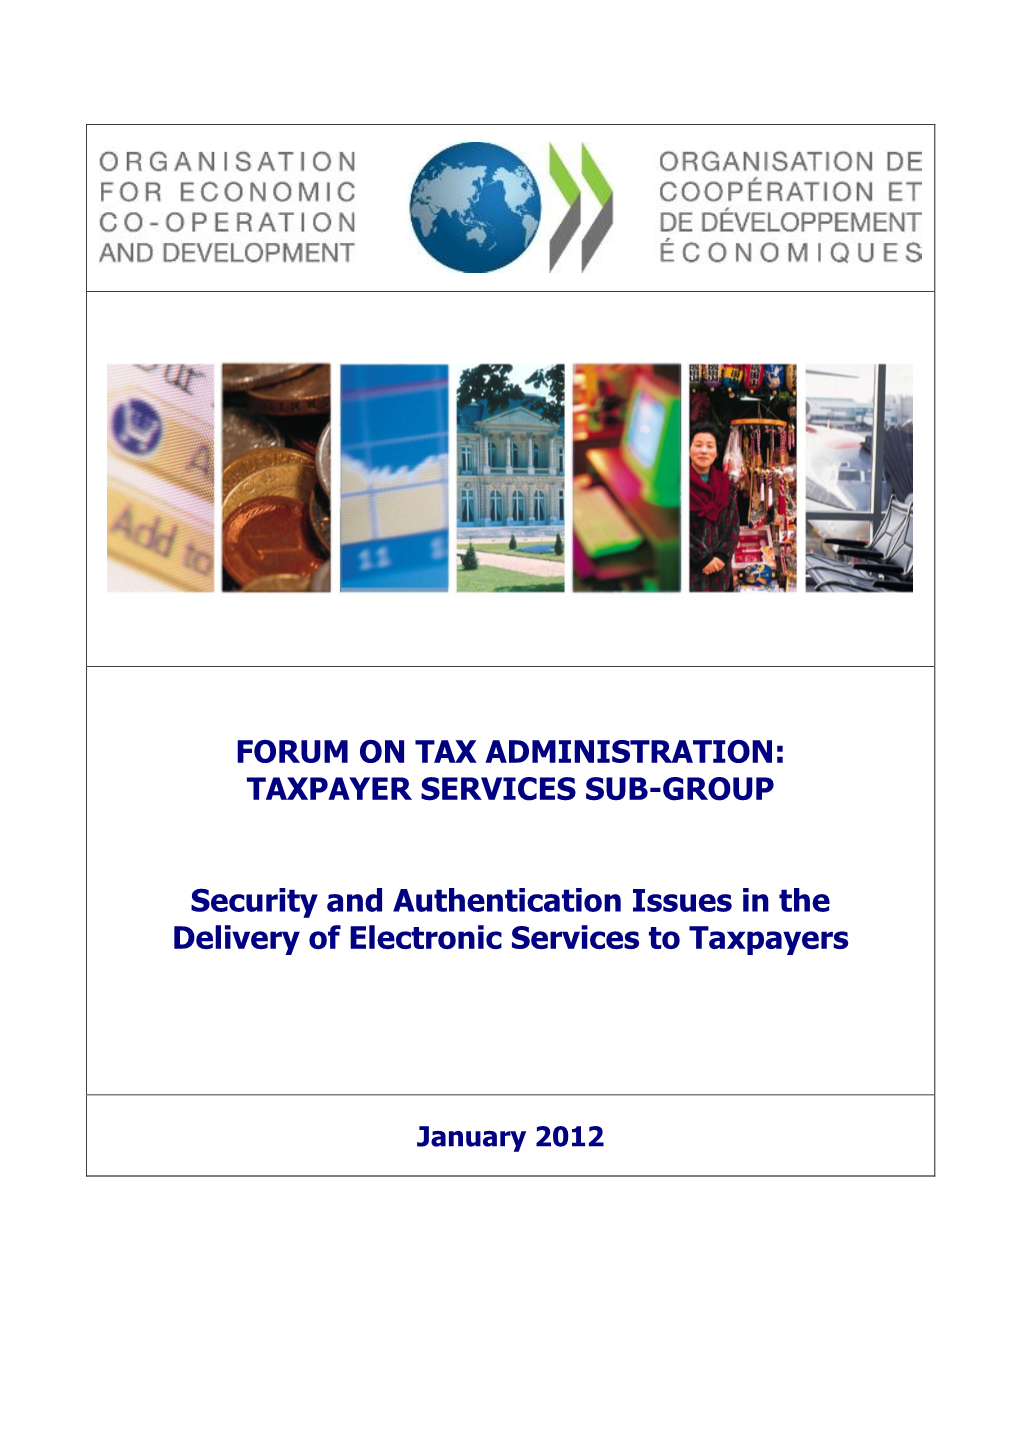 Forum on Tax Administration: Taxpayer Services Sub-Group